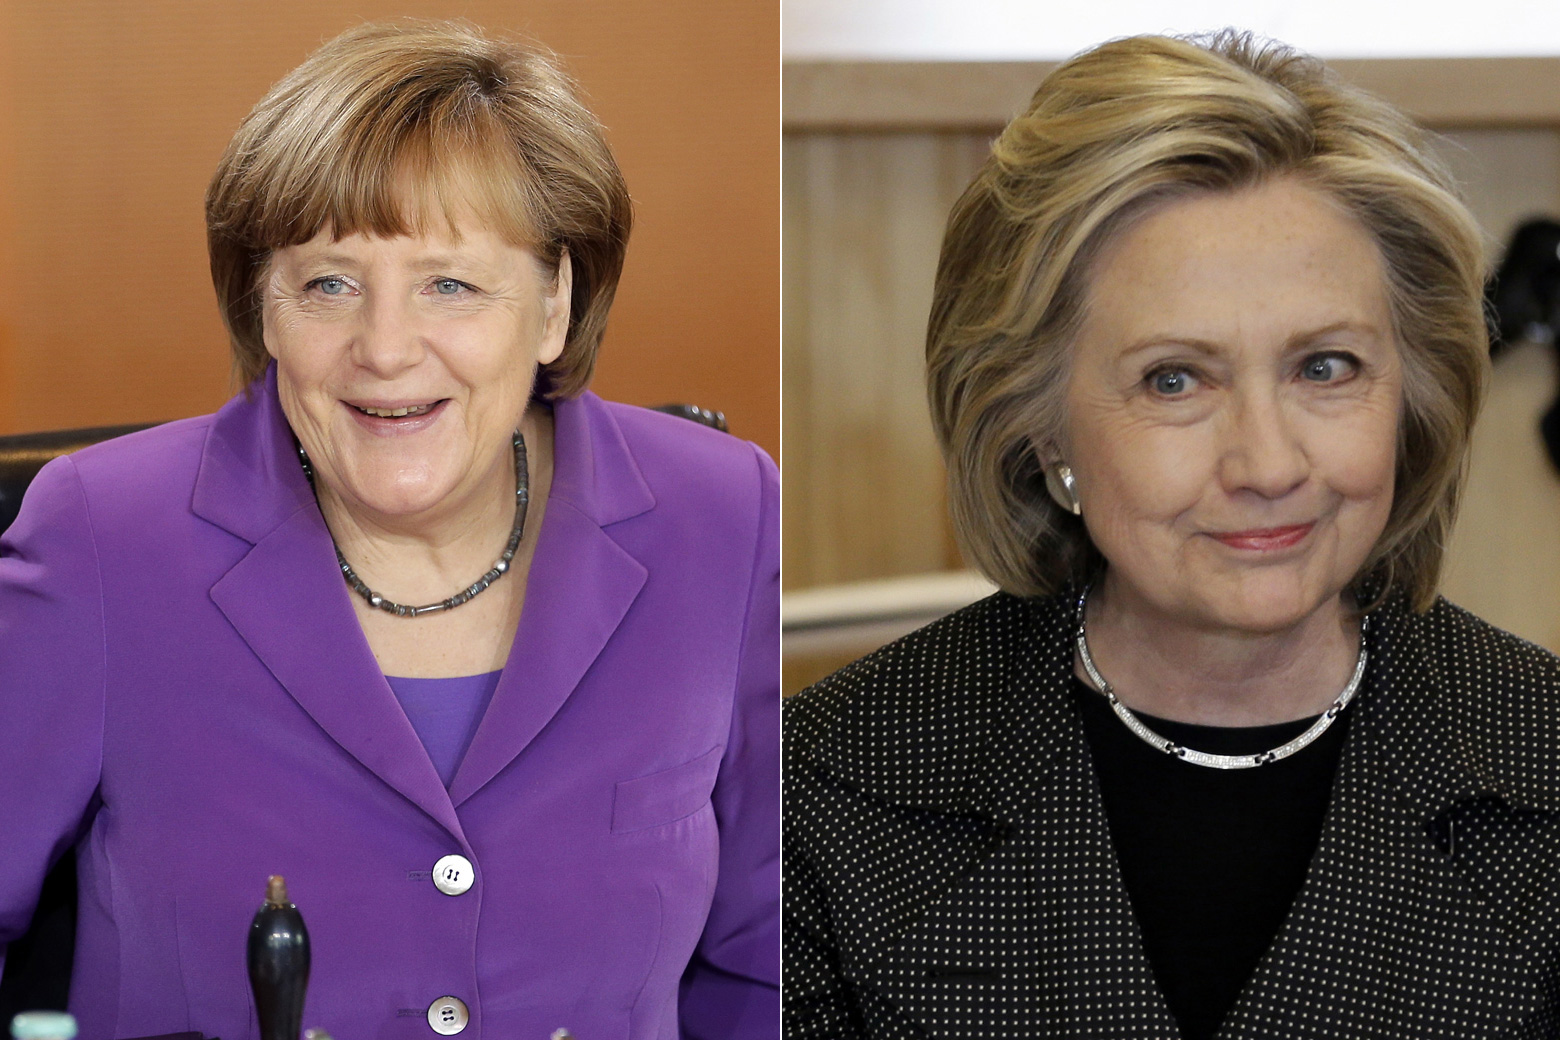 Forbes: Clinton second-most powerful woman in the world